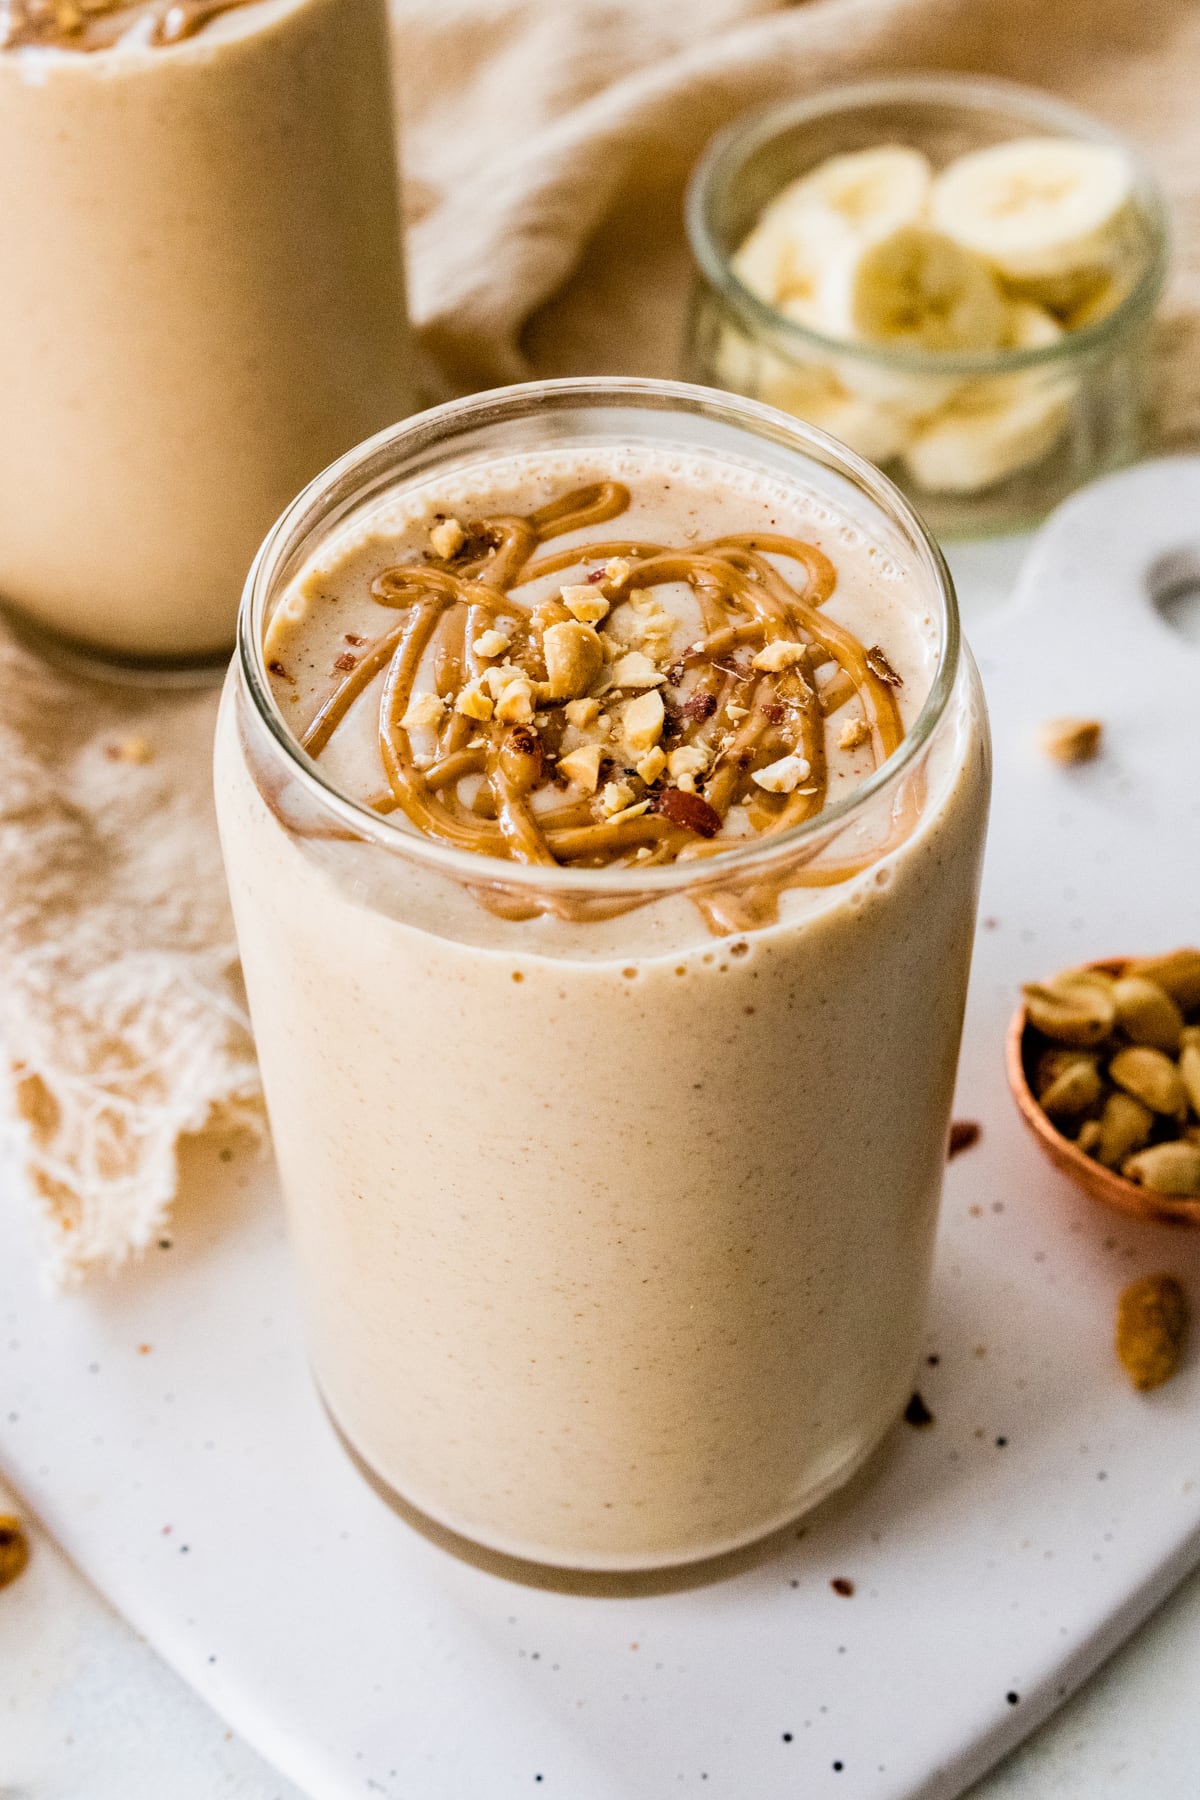 Oats Overnight Peanut Butter Crunch Bottled Shake - Gluten Free, Non-GMO, Vegan Friendly Breakfast Meal Replacement Shake with Powdered Oat Milk.